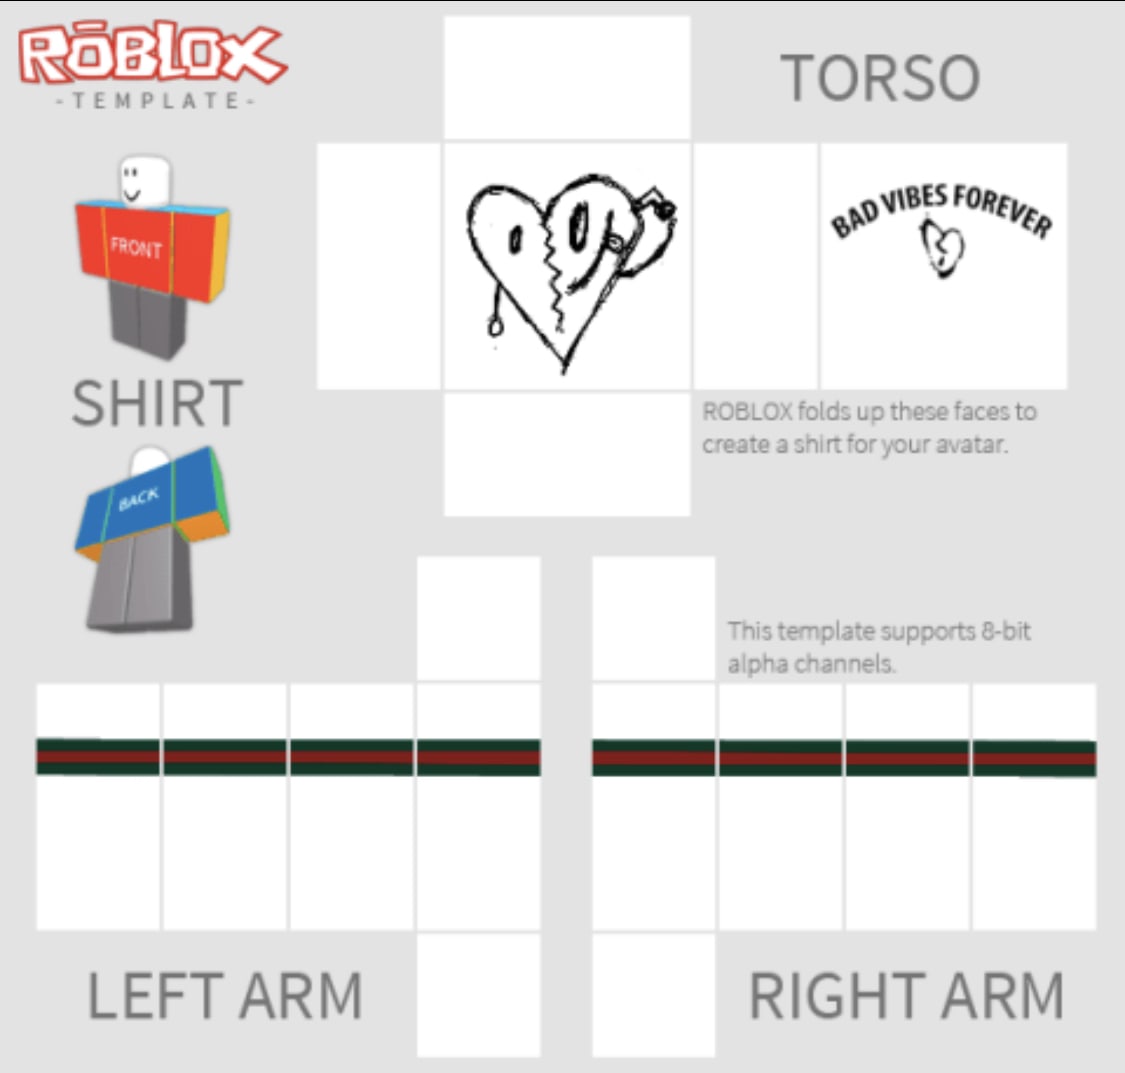 Best Roblox Shirts In The Catalog